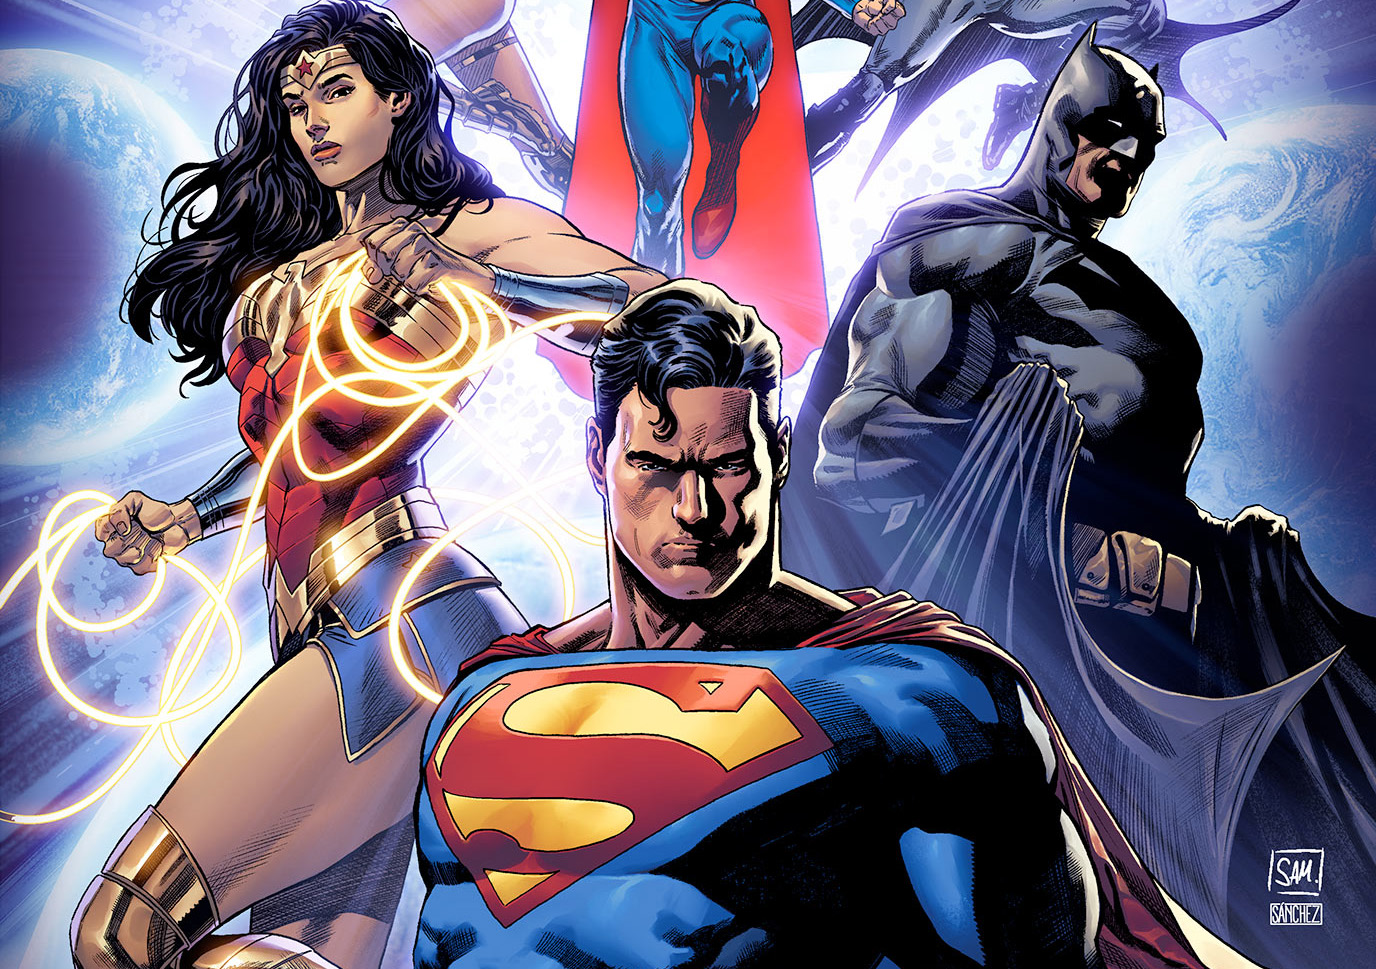 What is DC’s Dark Crisis event?